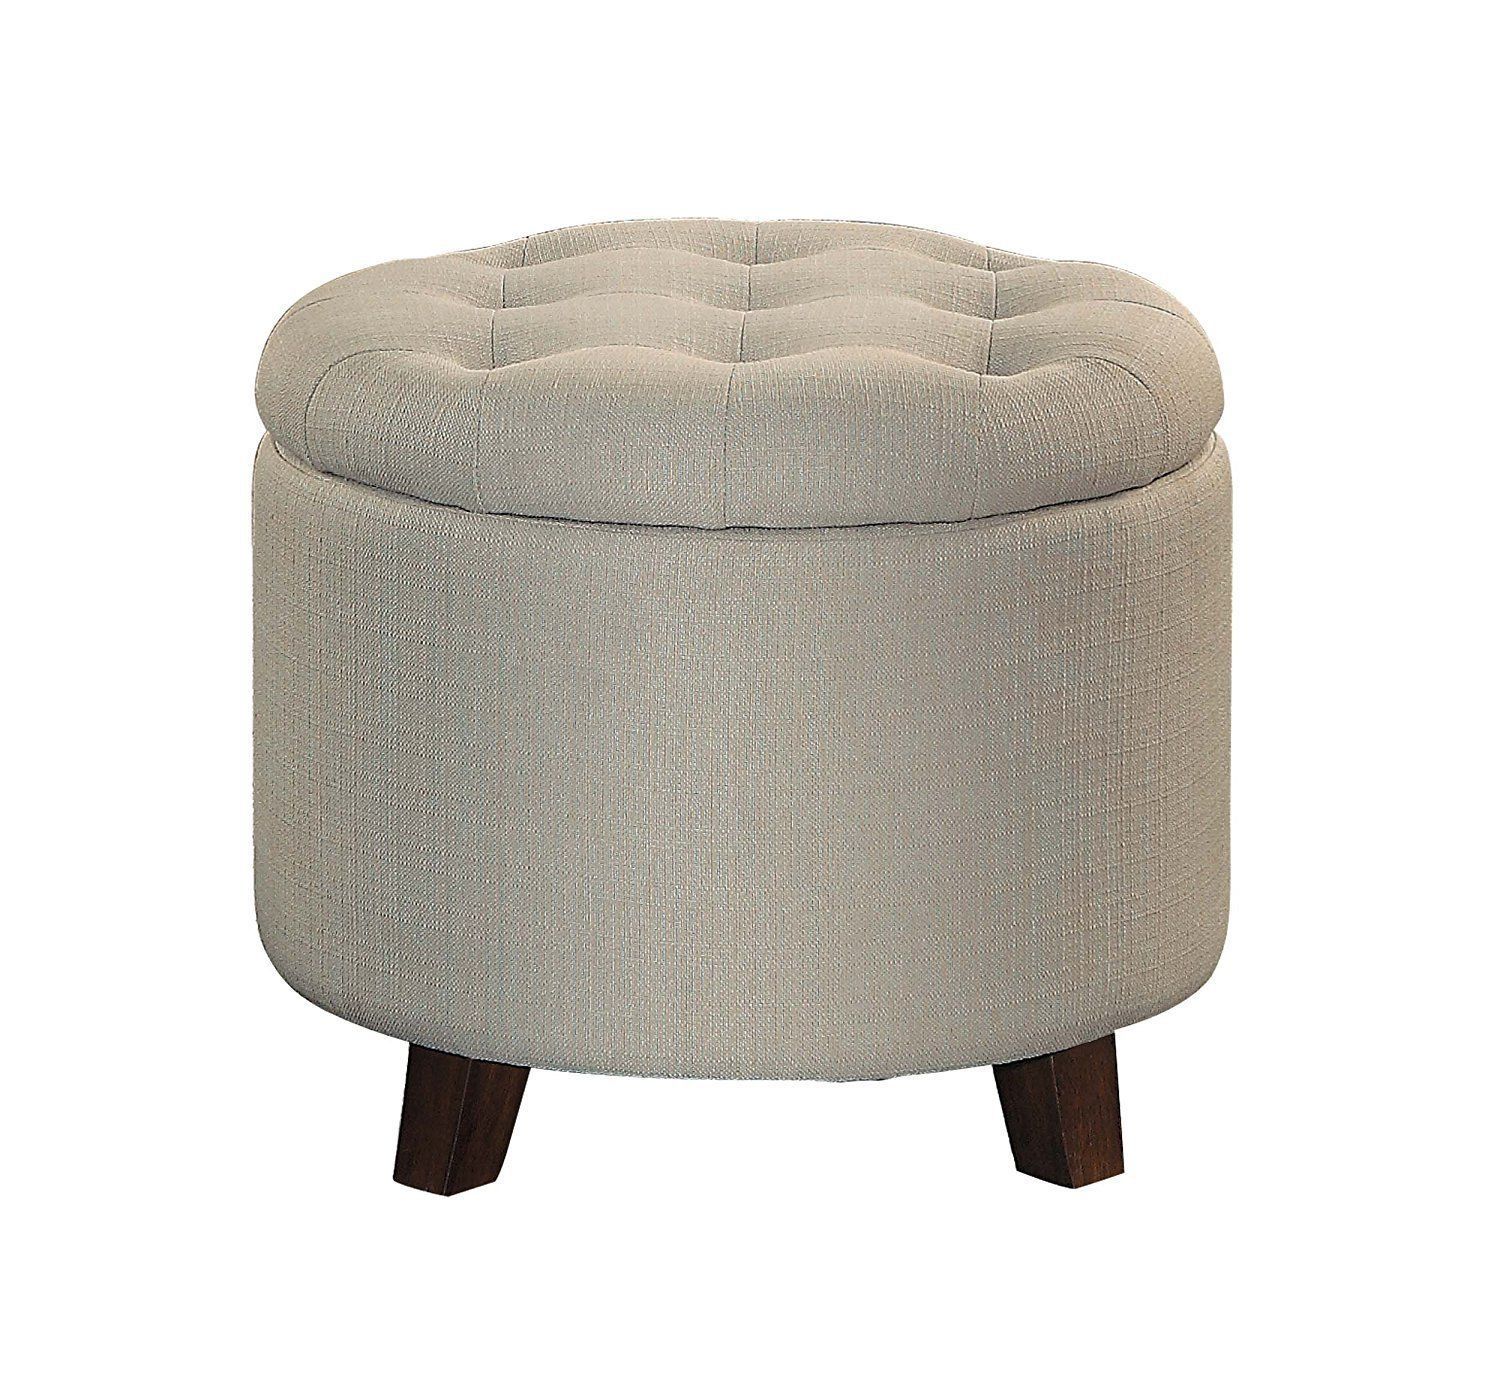 Button Tufted Wooden Round Storage Ottoman Upholstered In Fabric, Beige Pertaining To Brown And Gray Button Tufted Ottomans (View 18 of 20)